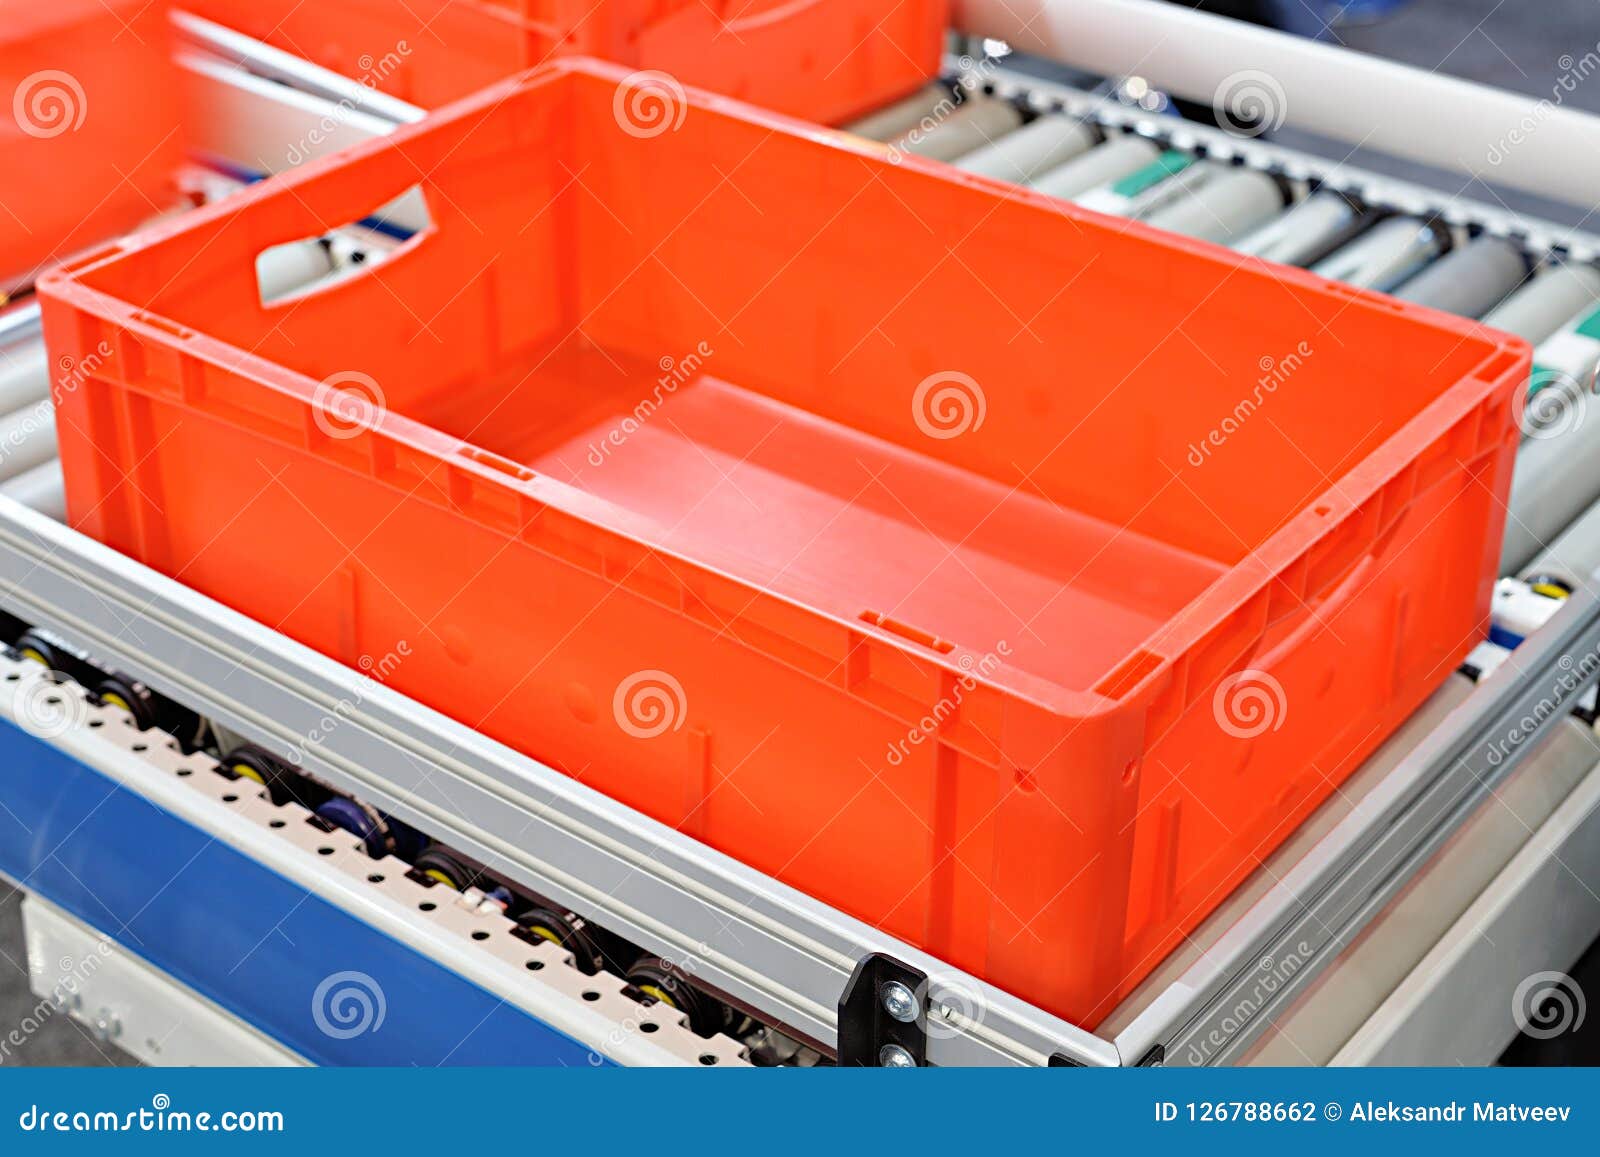 Red Plastic Containers On Roller Conveyors In An Automated